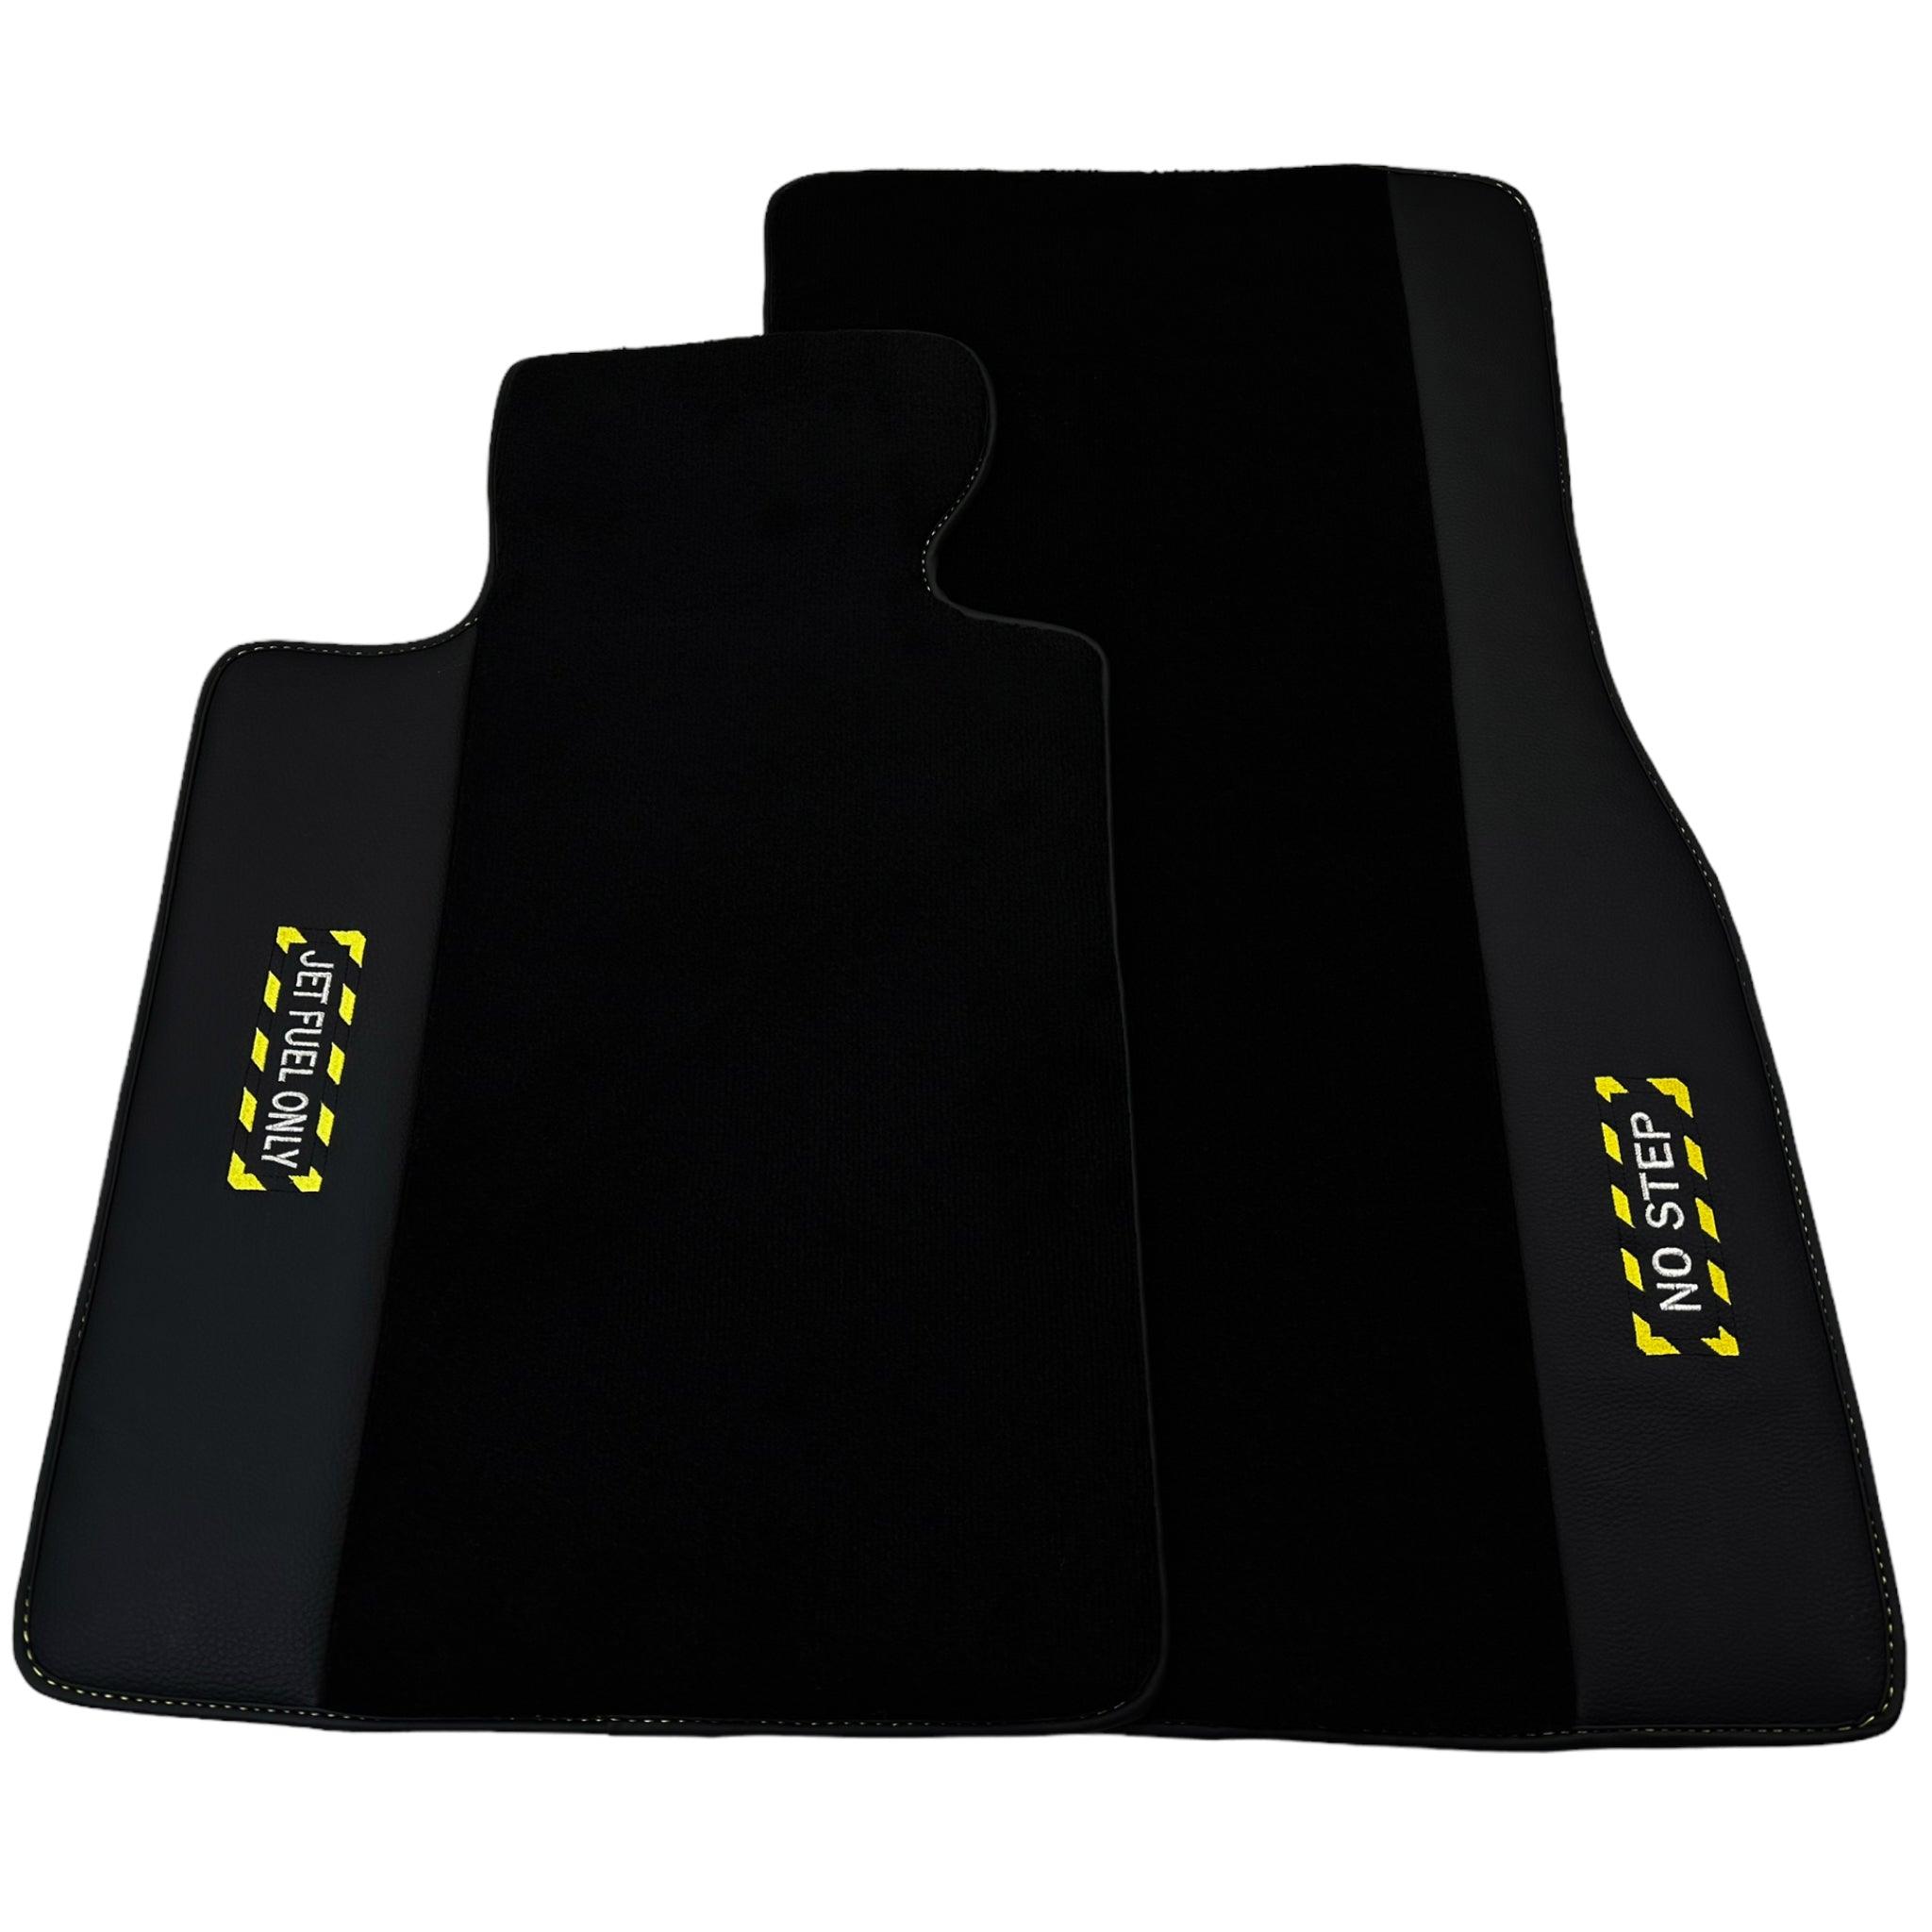 Black Floor Mats For BMW X3 - E83 SUV | Fighter Jet Edition - AutoWin